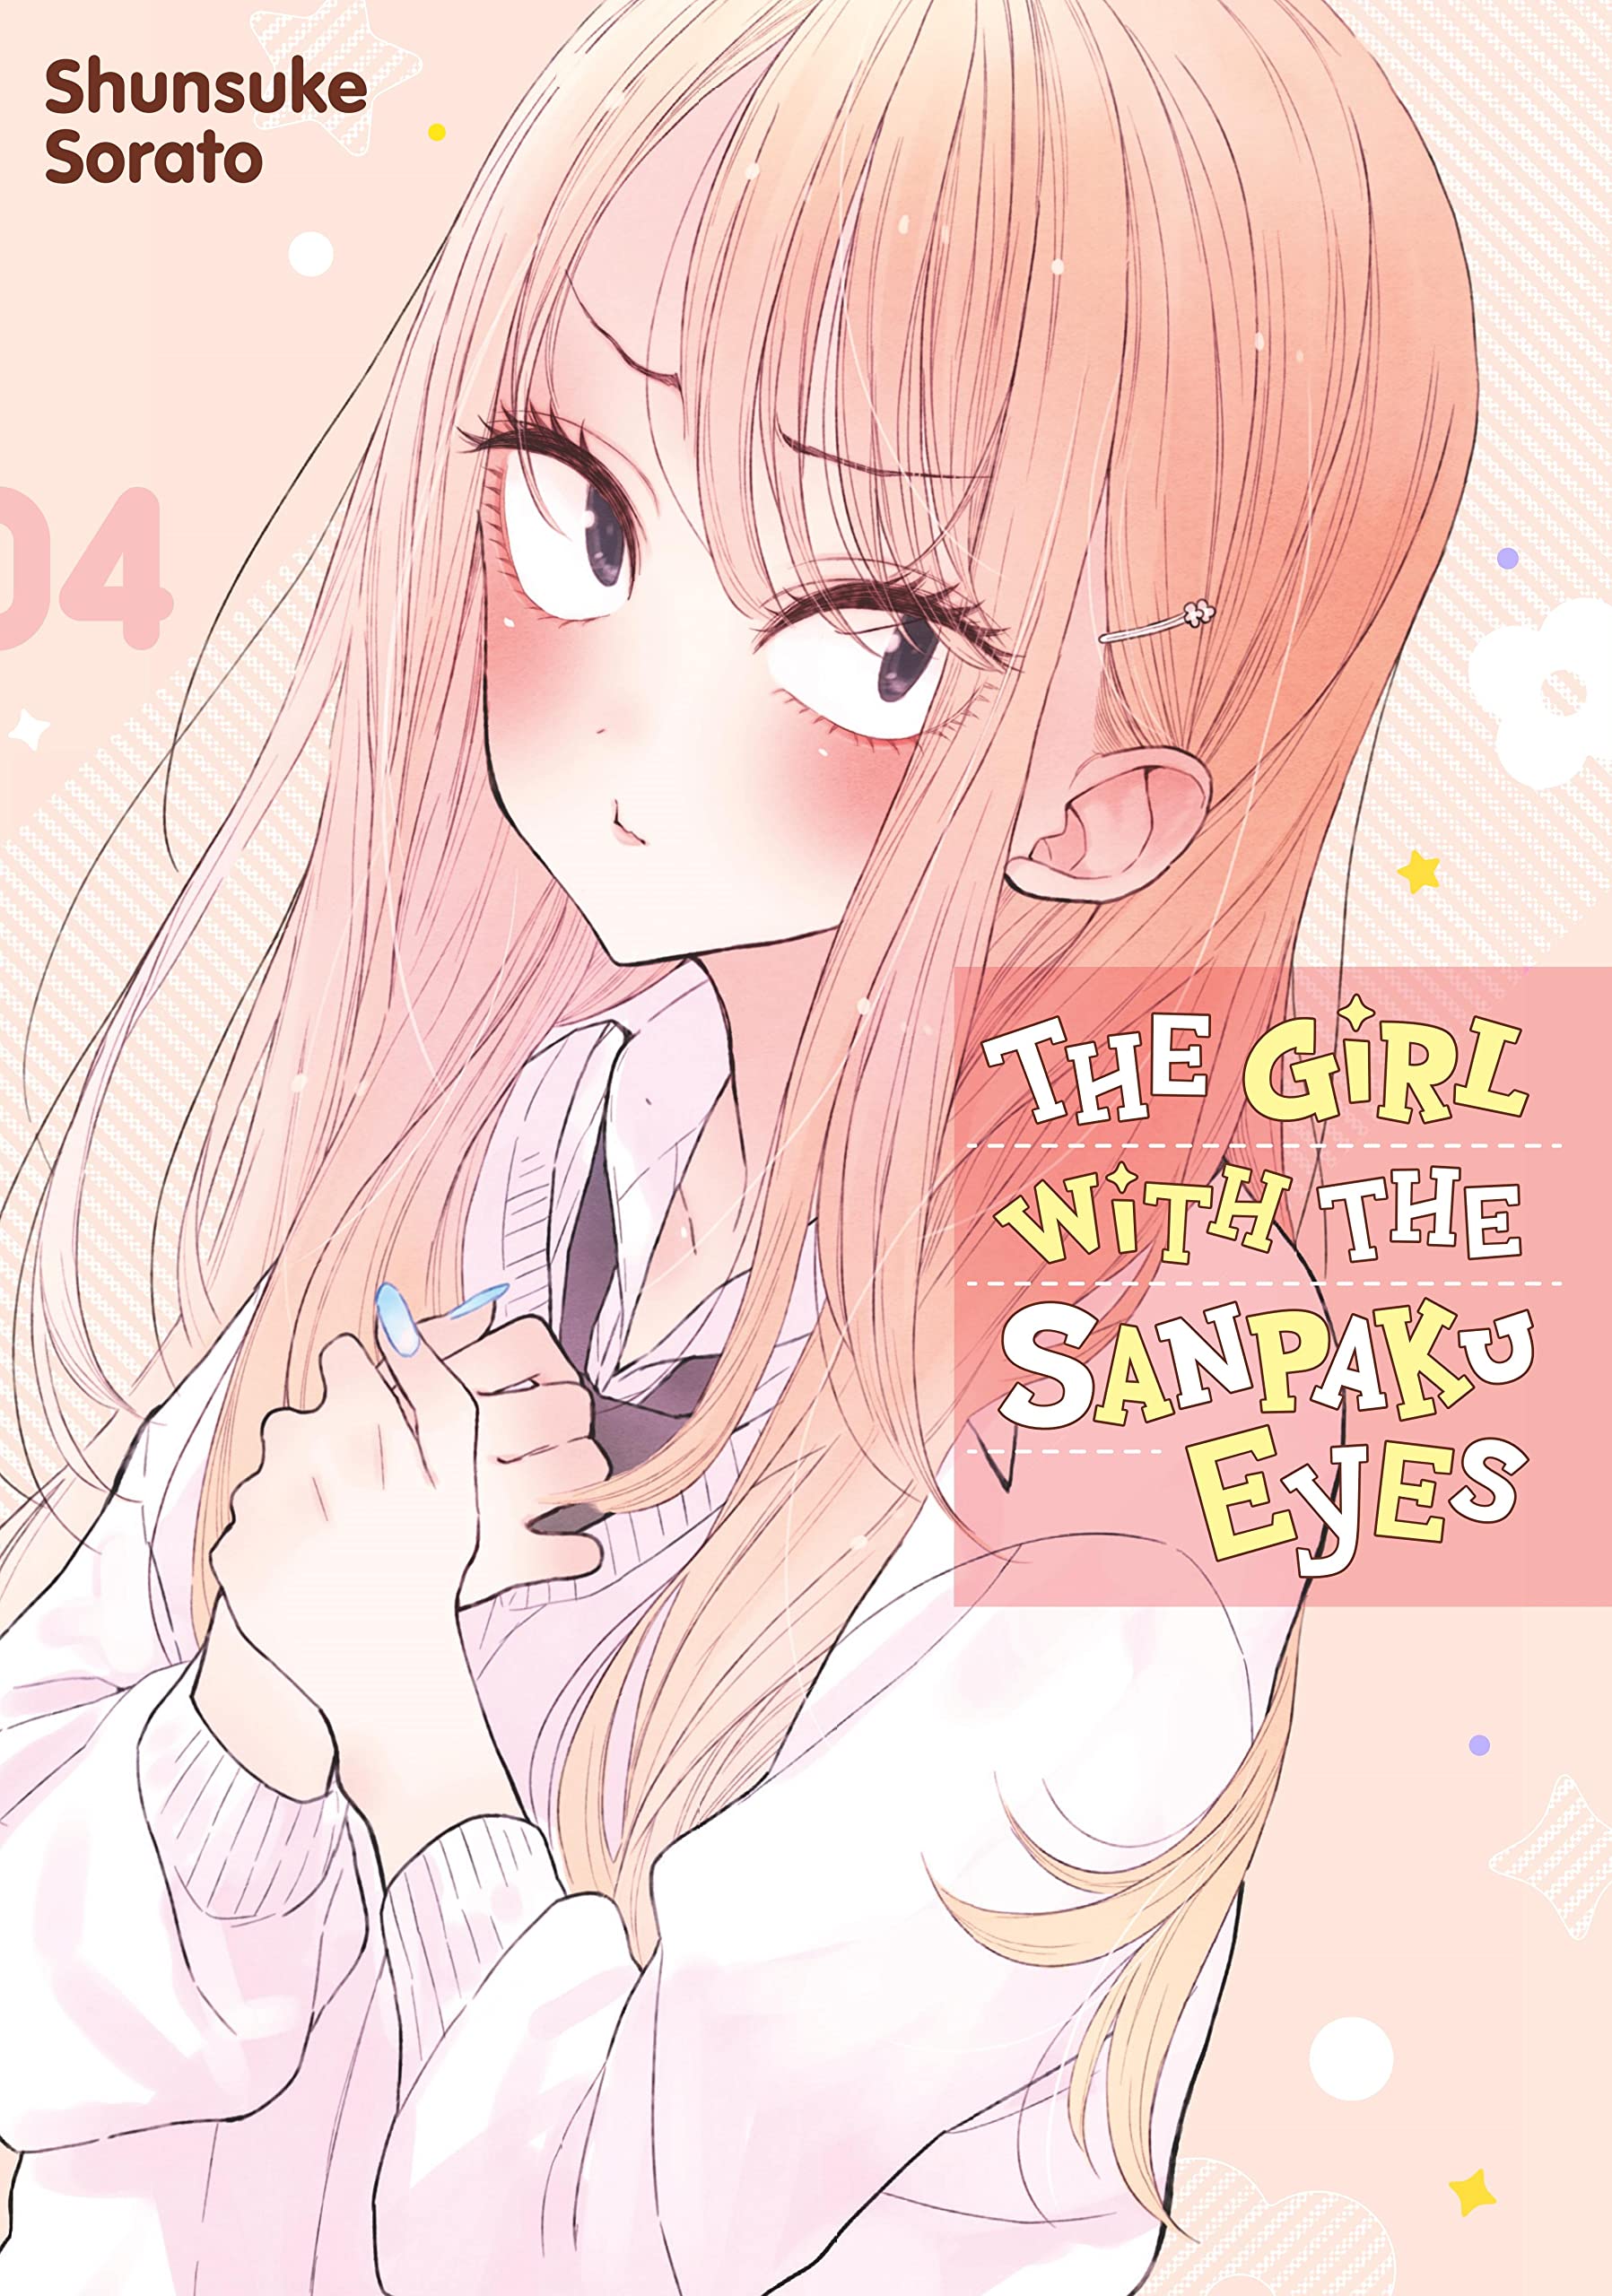 The Girl with the Sanpaku Eyes Vol. 04